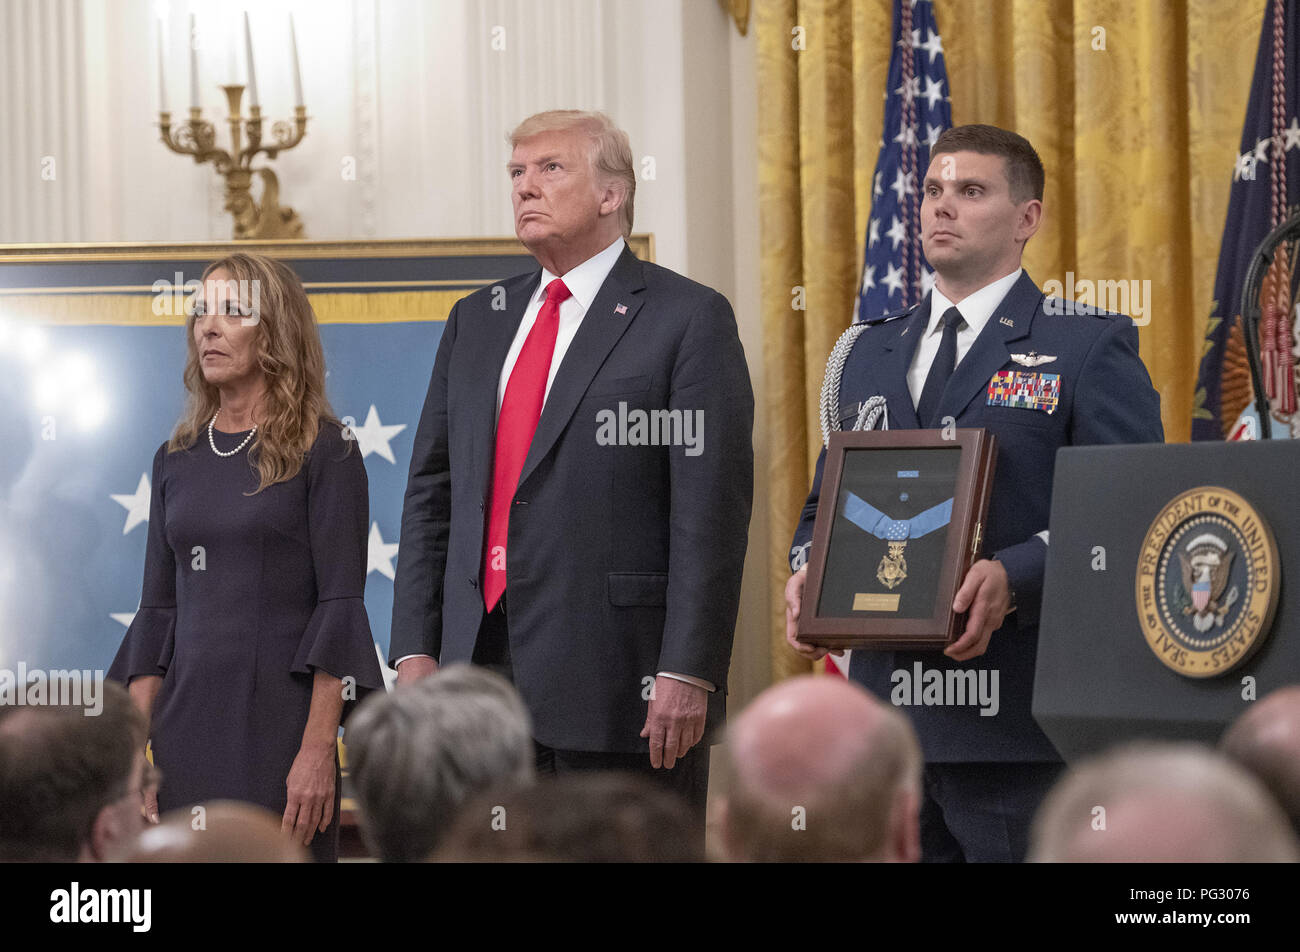 Washington, District of Columbia, USA. 22nd Aug, 2018. Valerie Nessel, widow of Technical Sergeant John A. Chapman, United States Air Force, left, stands with US President Donald J. Trump, center, makes remarks as she accepts the Medal of Honor posthumously from the President during a ceremony in the East Room of the White House. Sergeant Chapman is being honored for his actions on March 4, 2002, on Takur Ghar mountain in Afghanistan where he gave his life to save his teammates Credit: Ron Sachs/CNP/ZUMA Wire/Alamy Live News Stock Photo